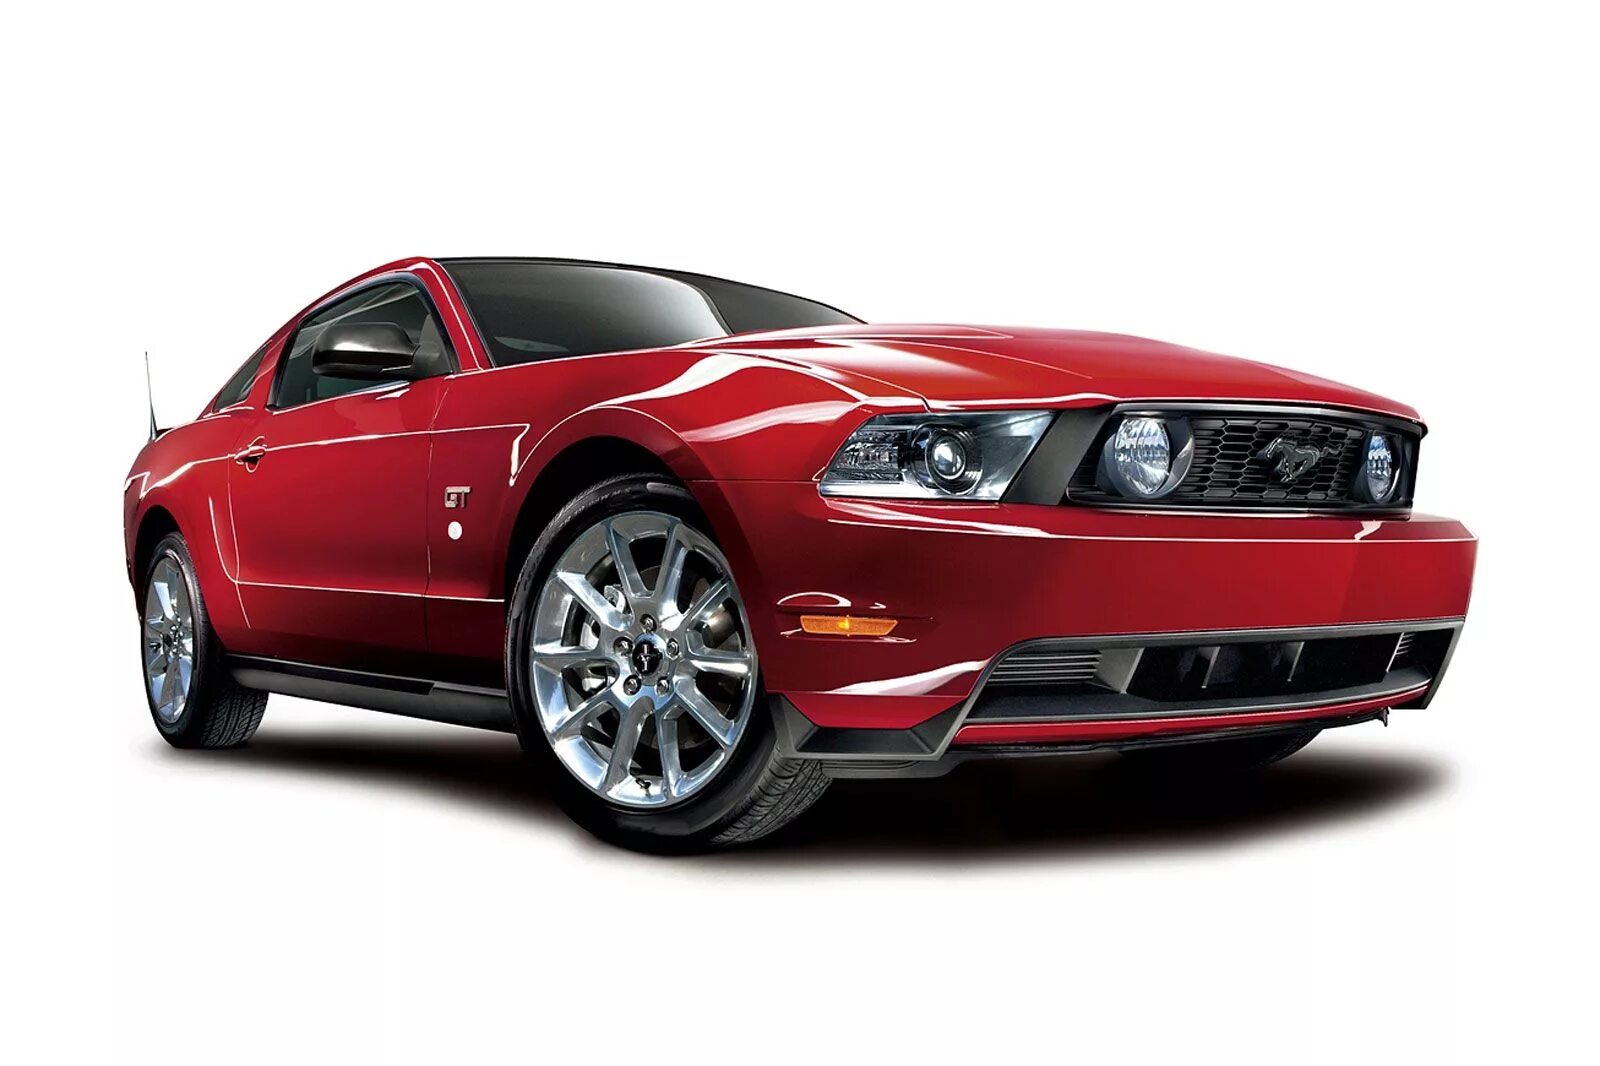 Мустанг объем. Ford Mustang 5.0. Ford Mustang gt 2011. 2010 Ford Mustang 5.0 gt. Форд Мустанг gt 2010.